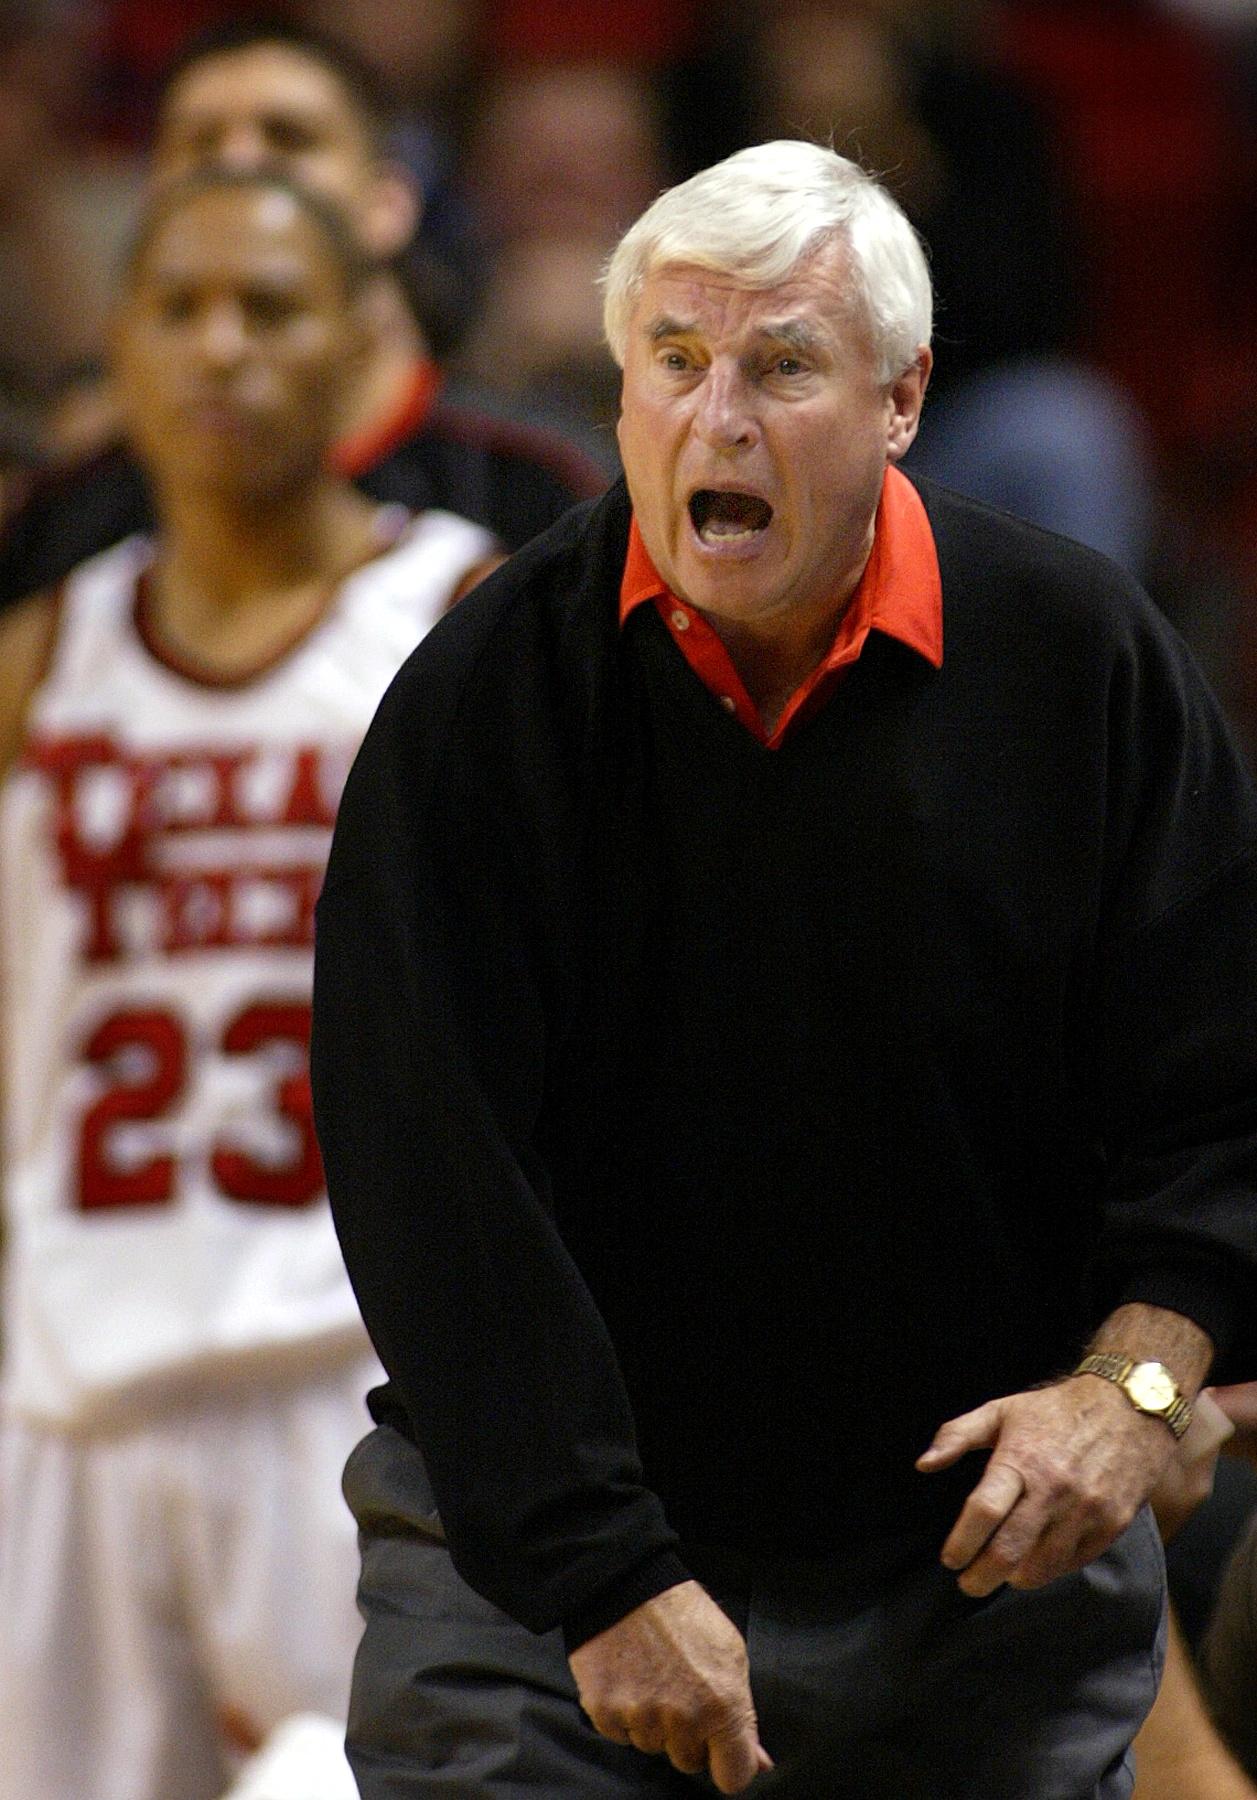 Bob Knight reacts during the second period of Texas Tech's game against Baylor University in Lubbock